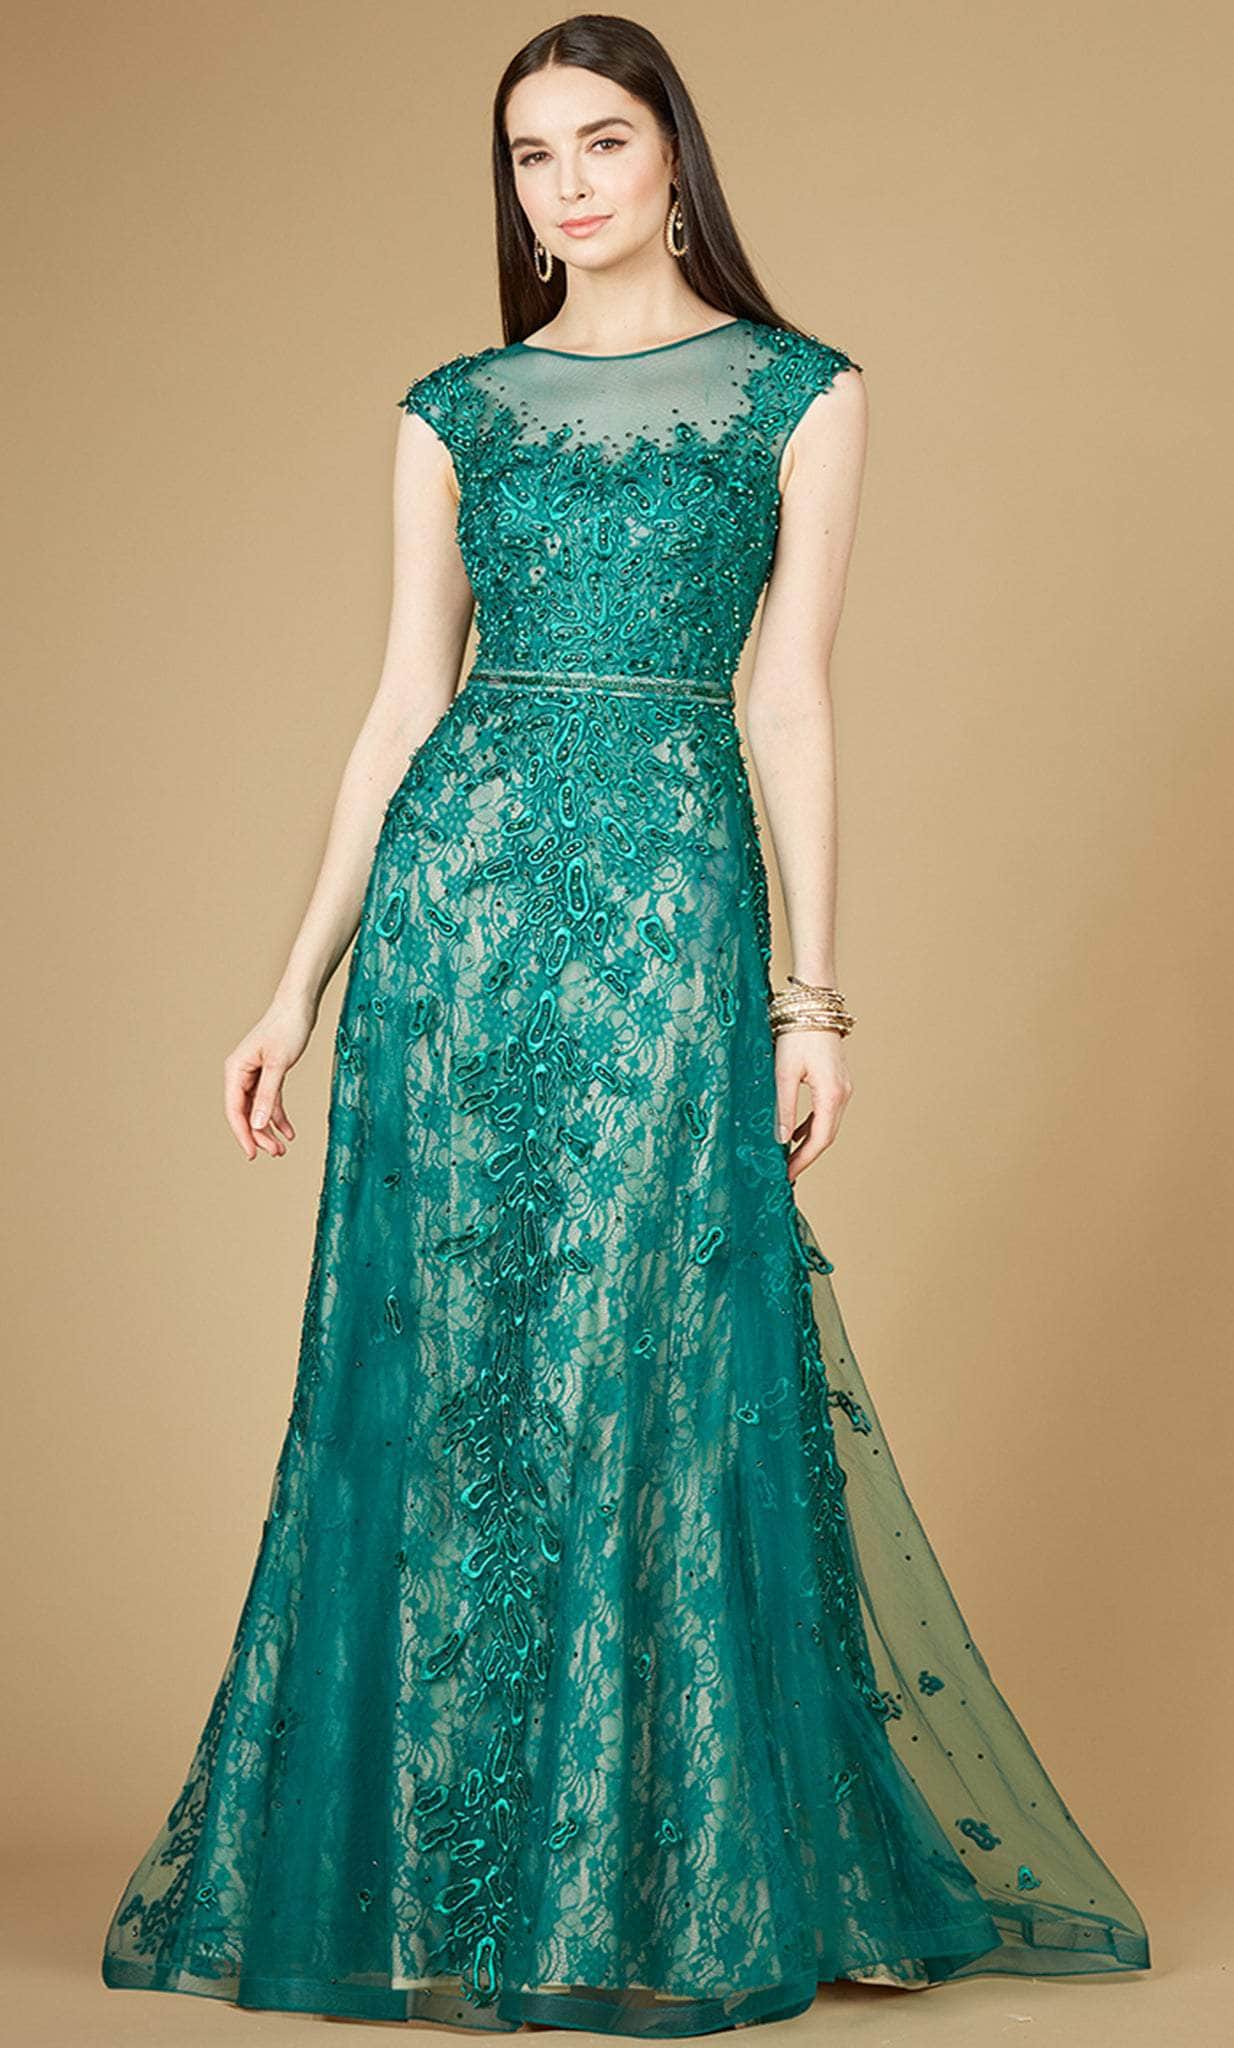 Lara Dresses 29250 - Embroidered Cap Sleeve Evening Gown
